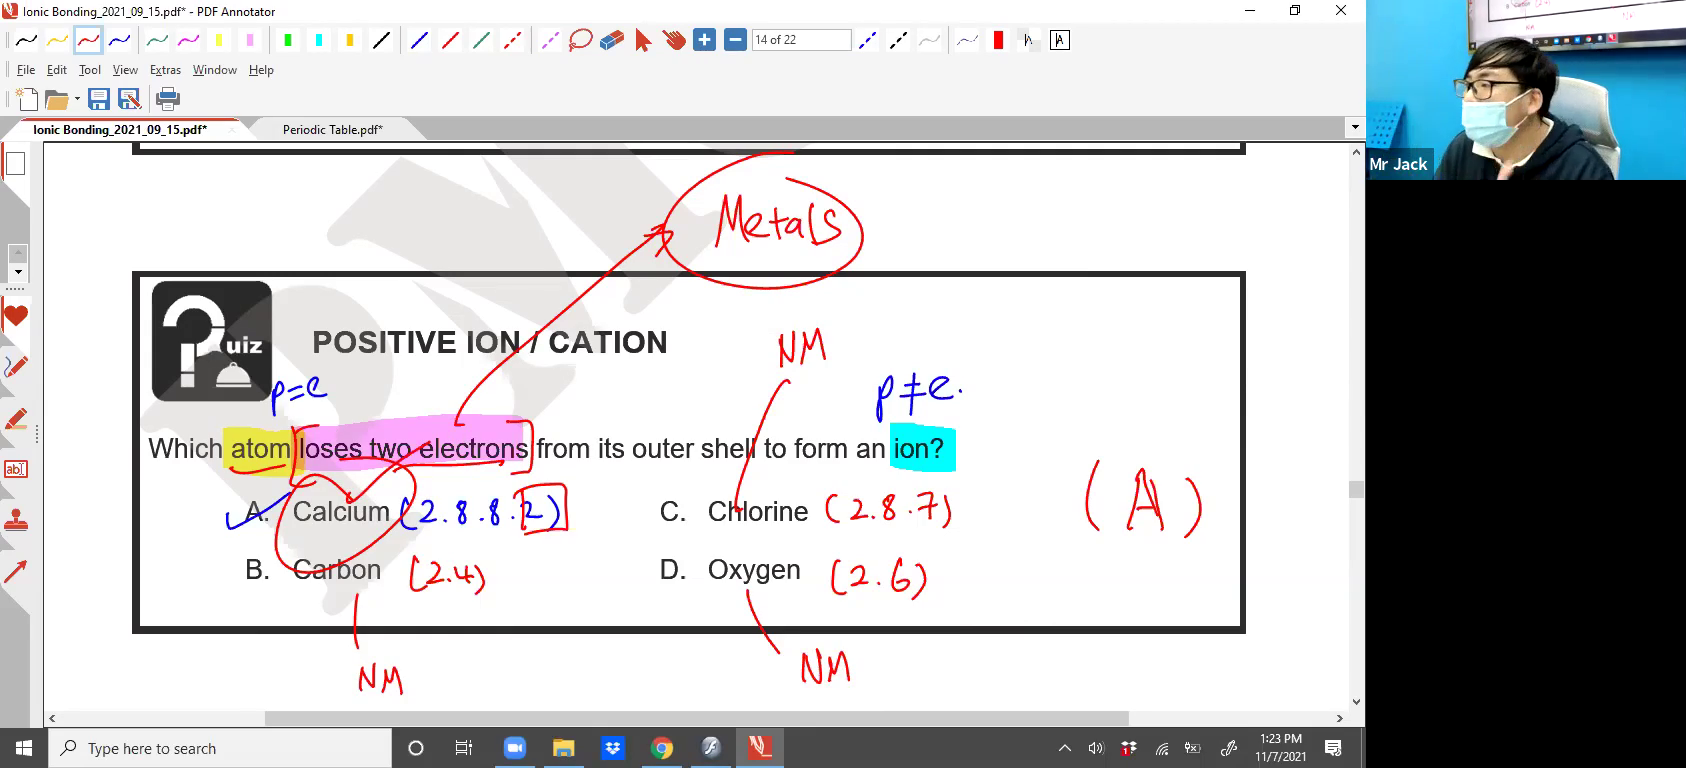 [ATOMIC STRUCTURE] Ions